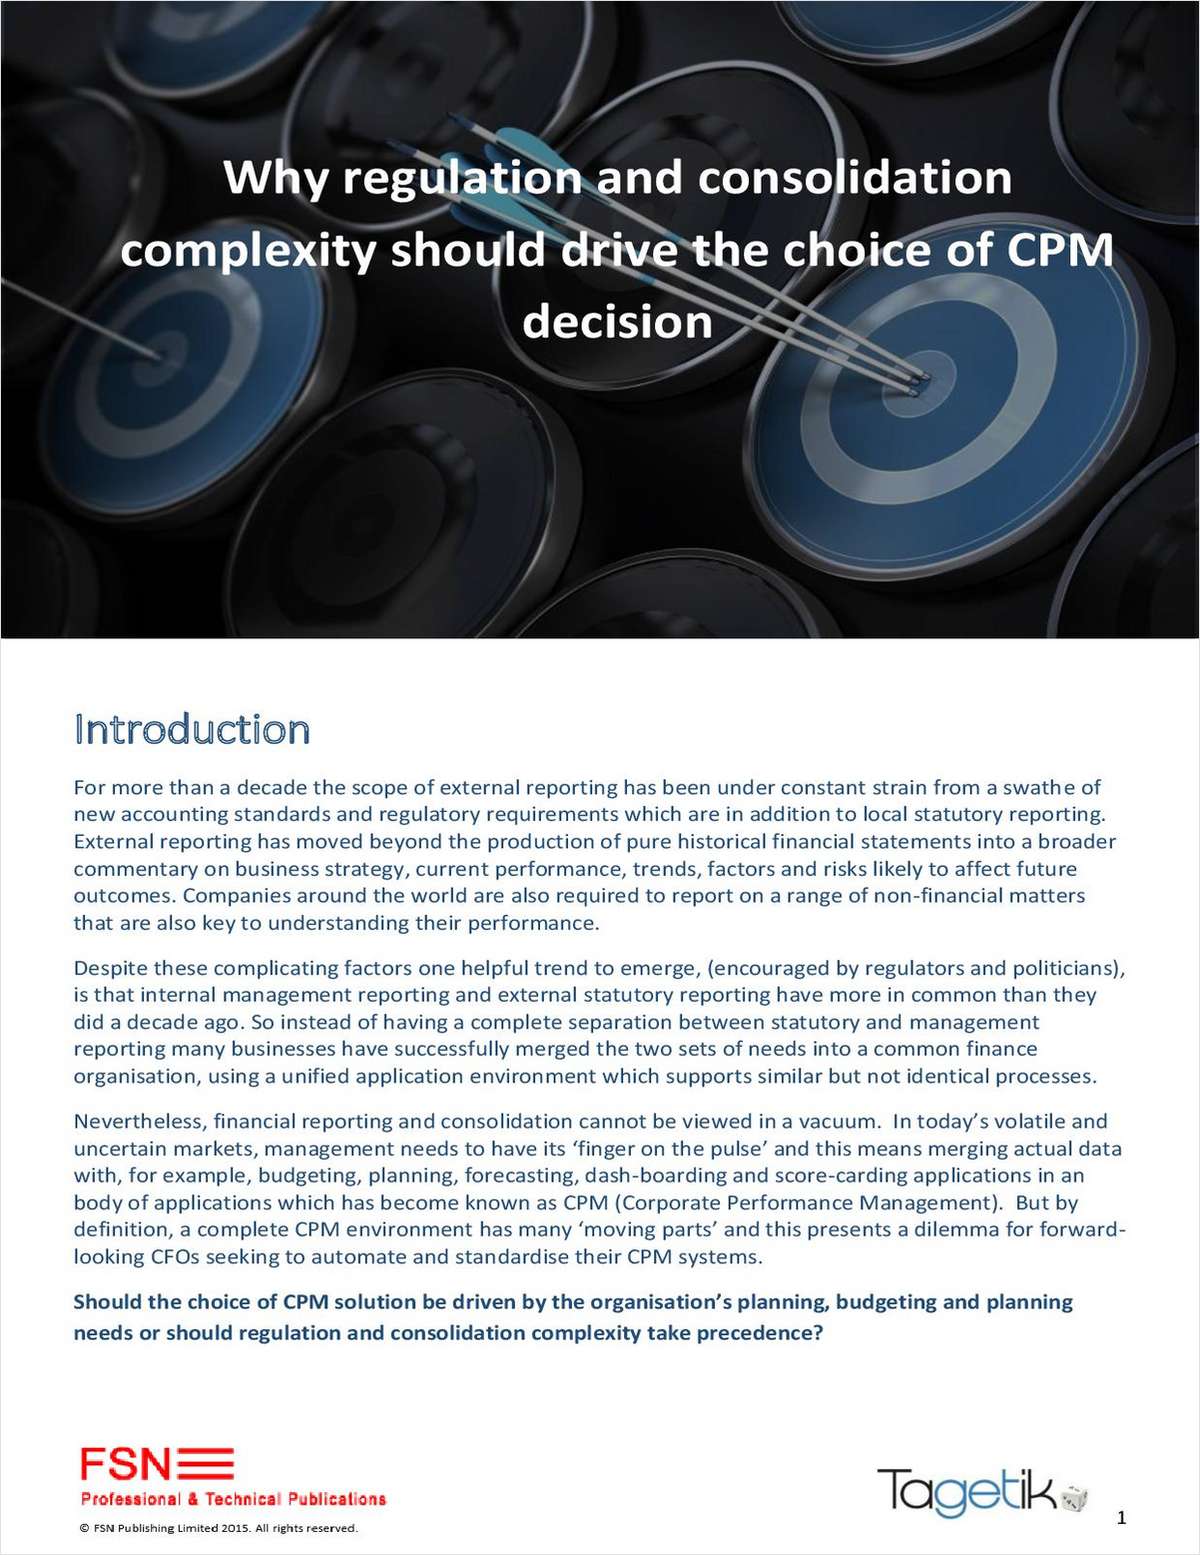 A Look at Regulation and Consolidation Complexity and How it Drives Your CPM Decision